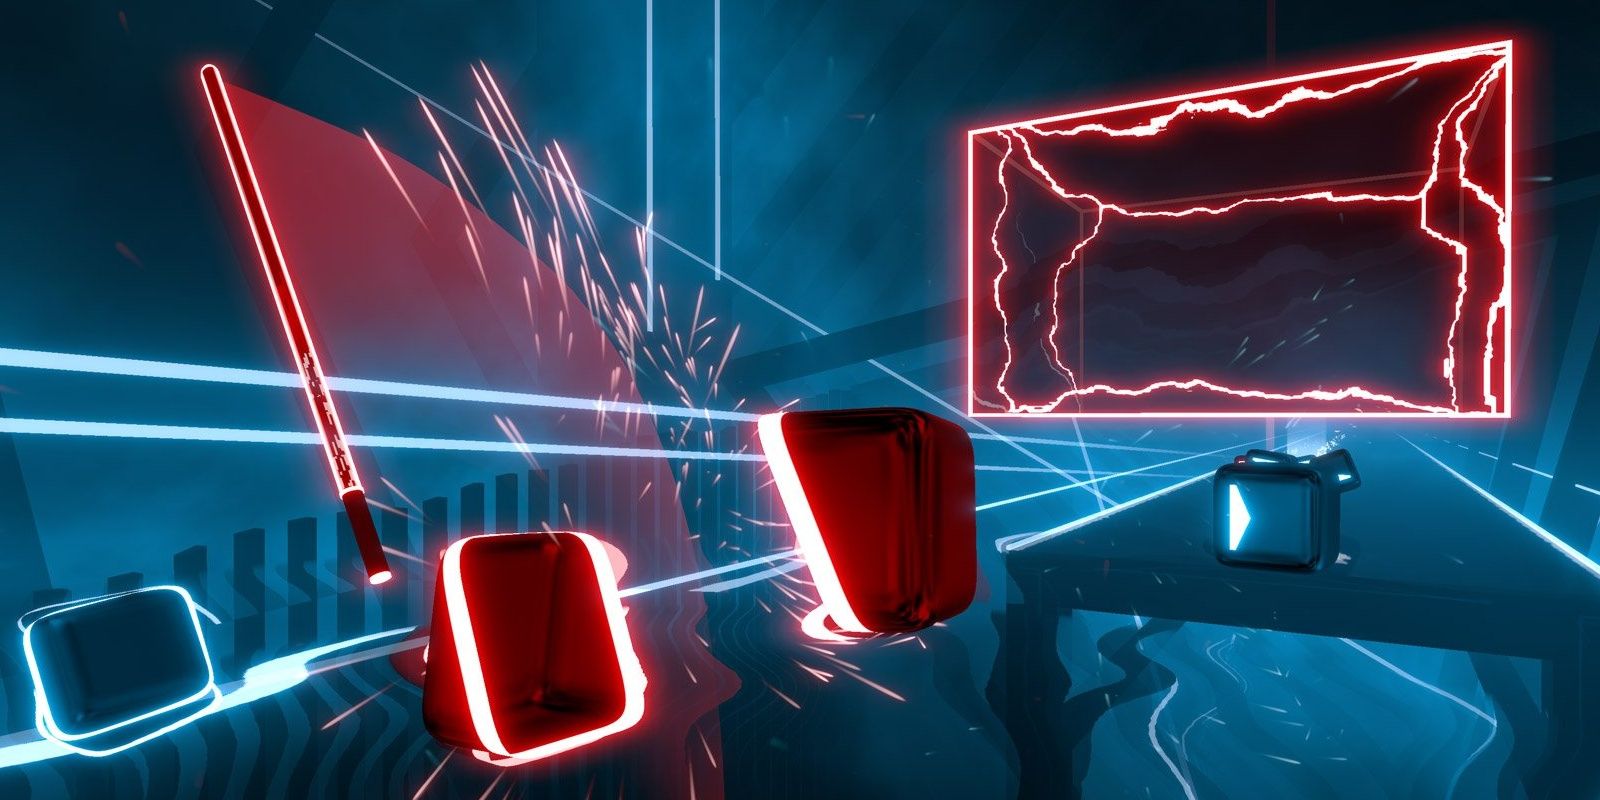 A red block is sliced in half with an oncoming wall obstacle in a neon environment